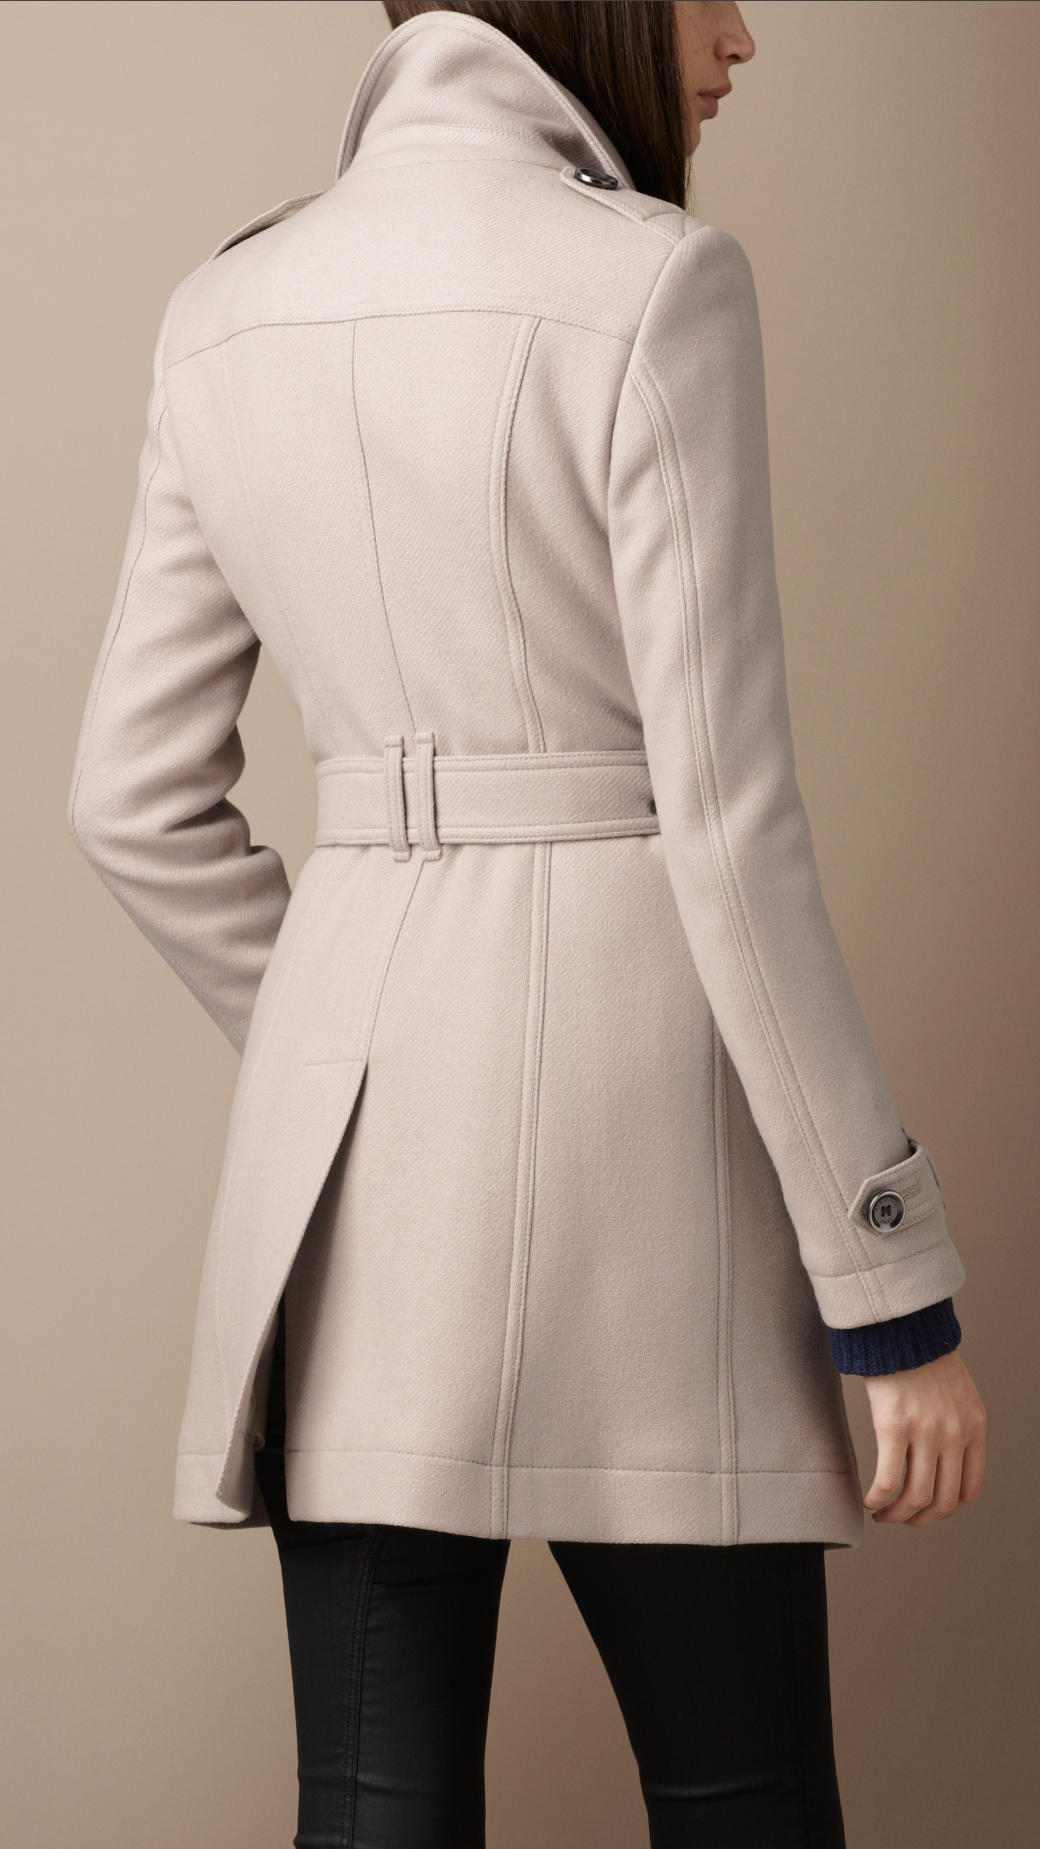 Lyst - Burberry Brit Funnel Neck Wool Coat in Natural1040 x 1849